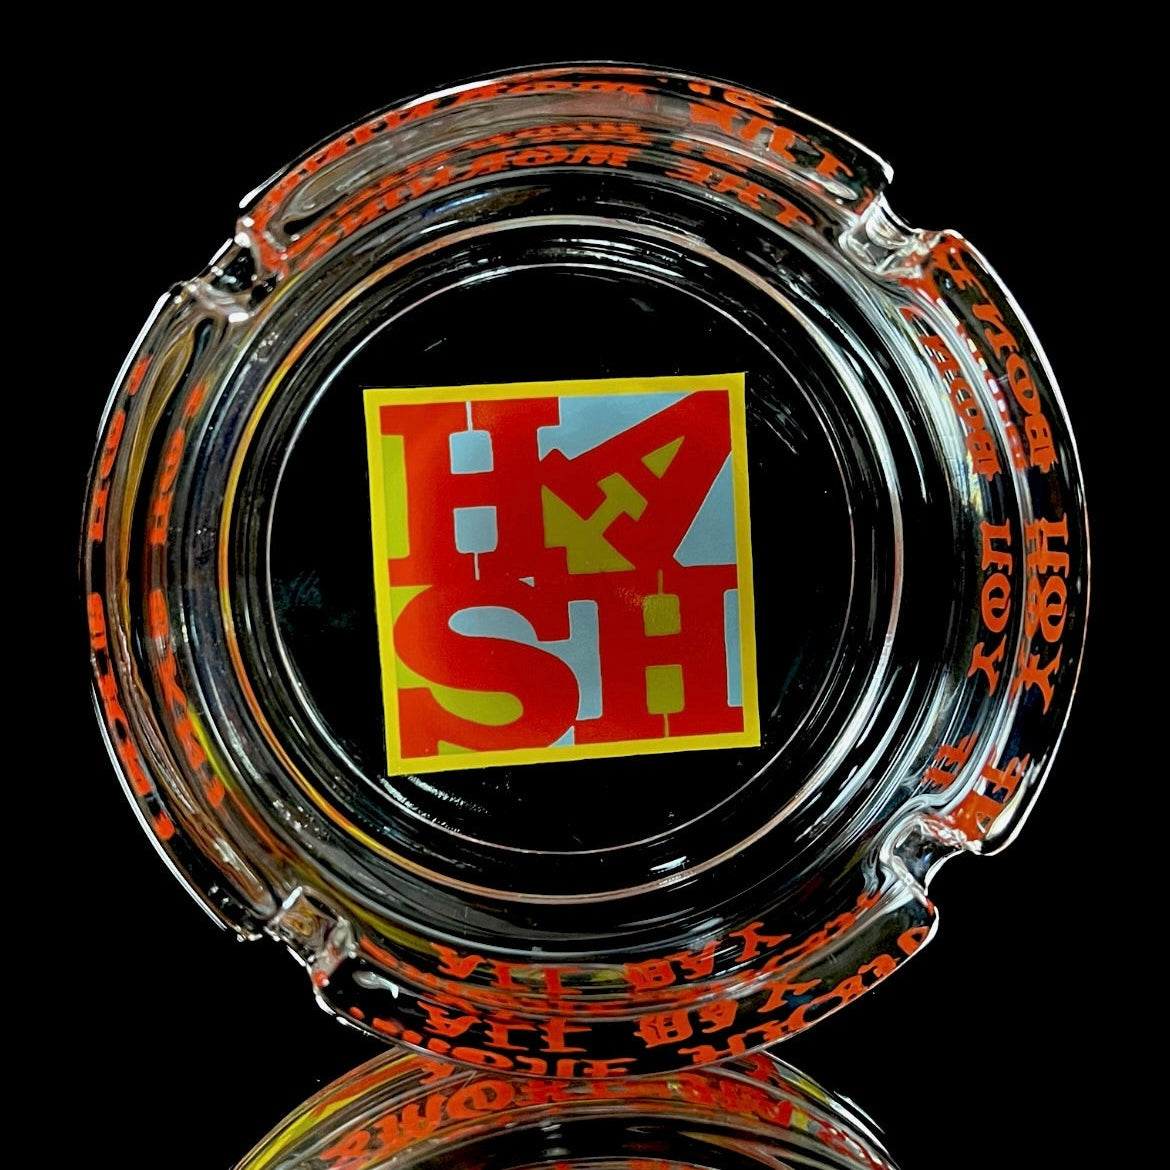 “Love Hash” ashtray by Lot Comedy